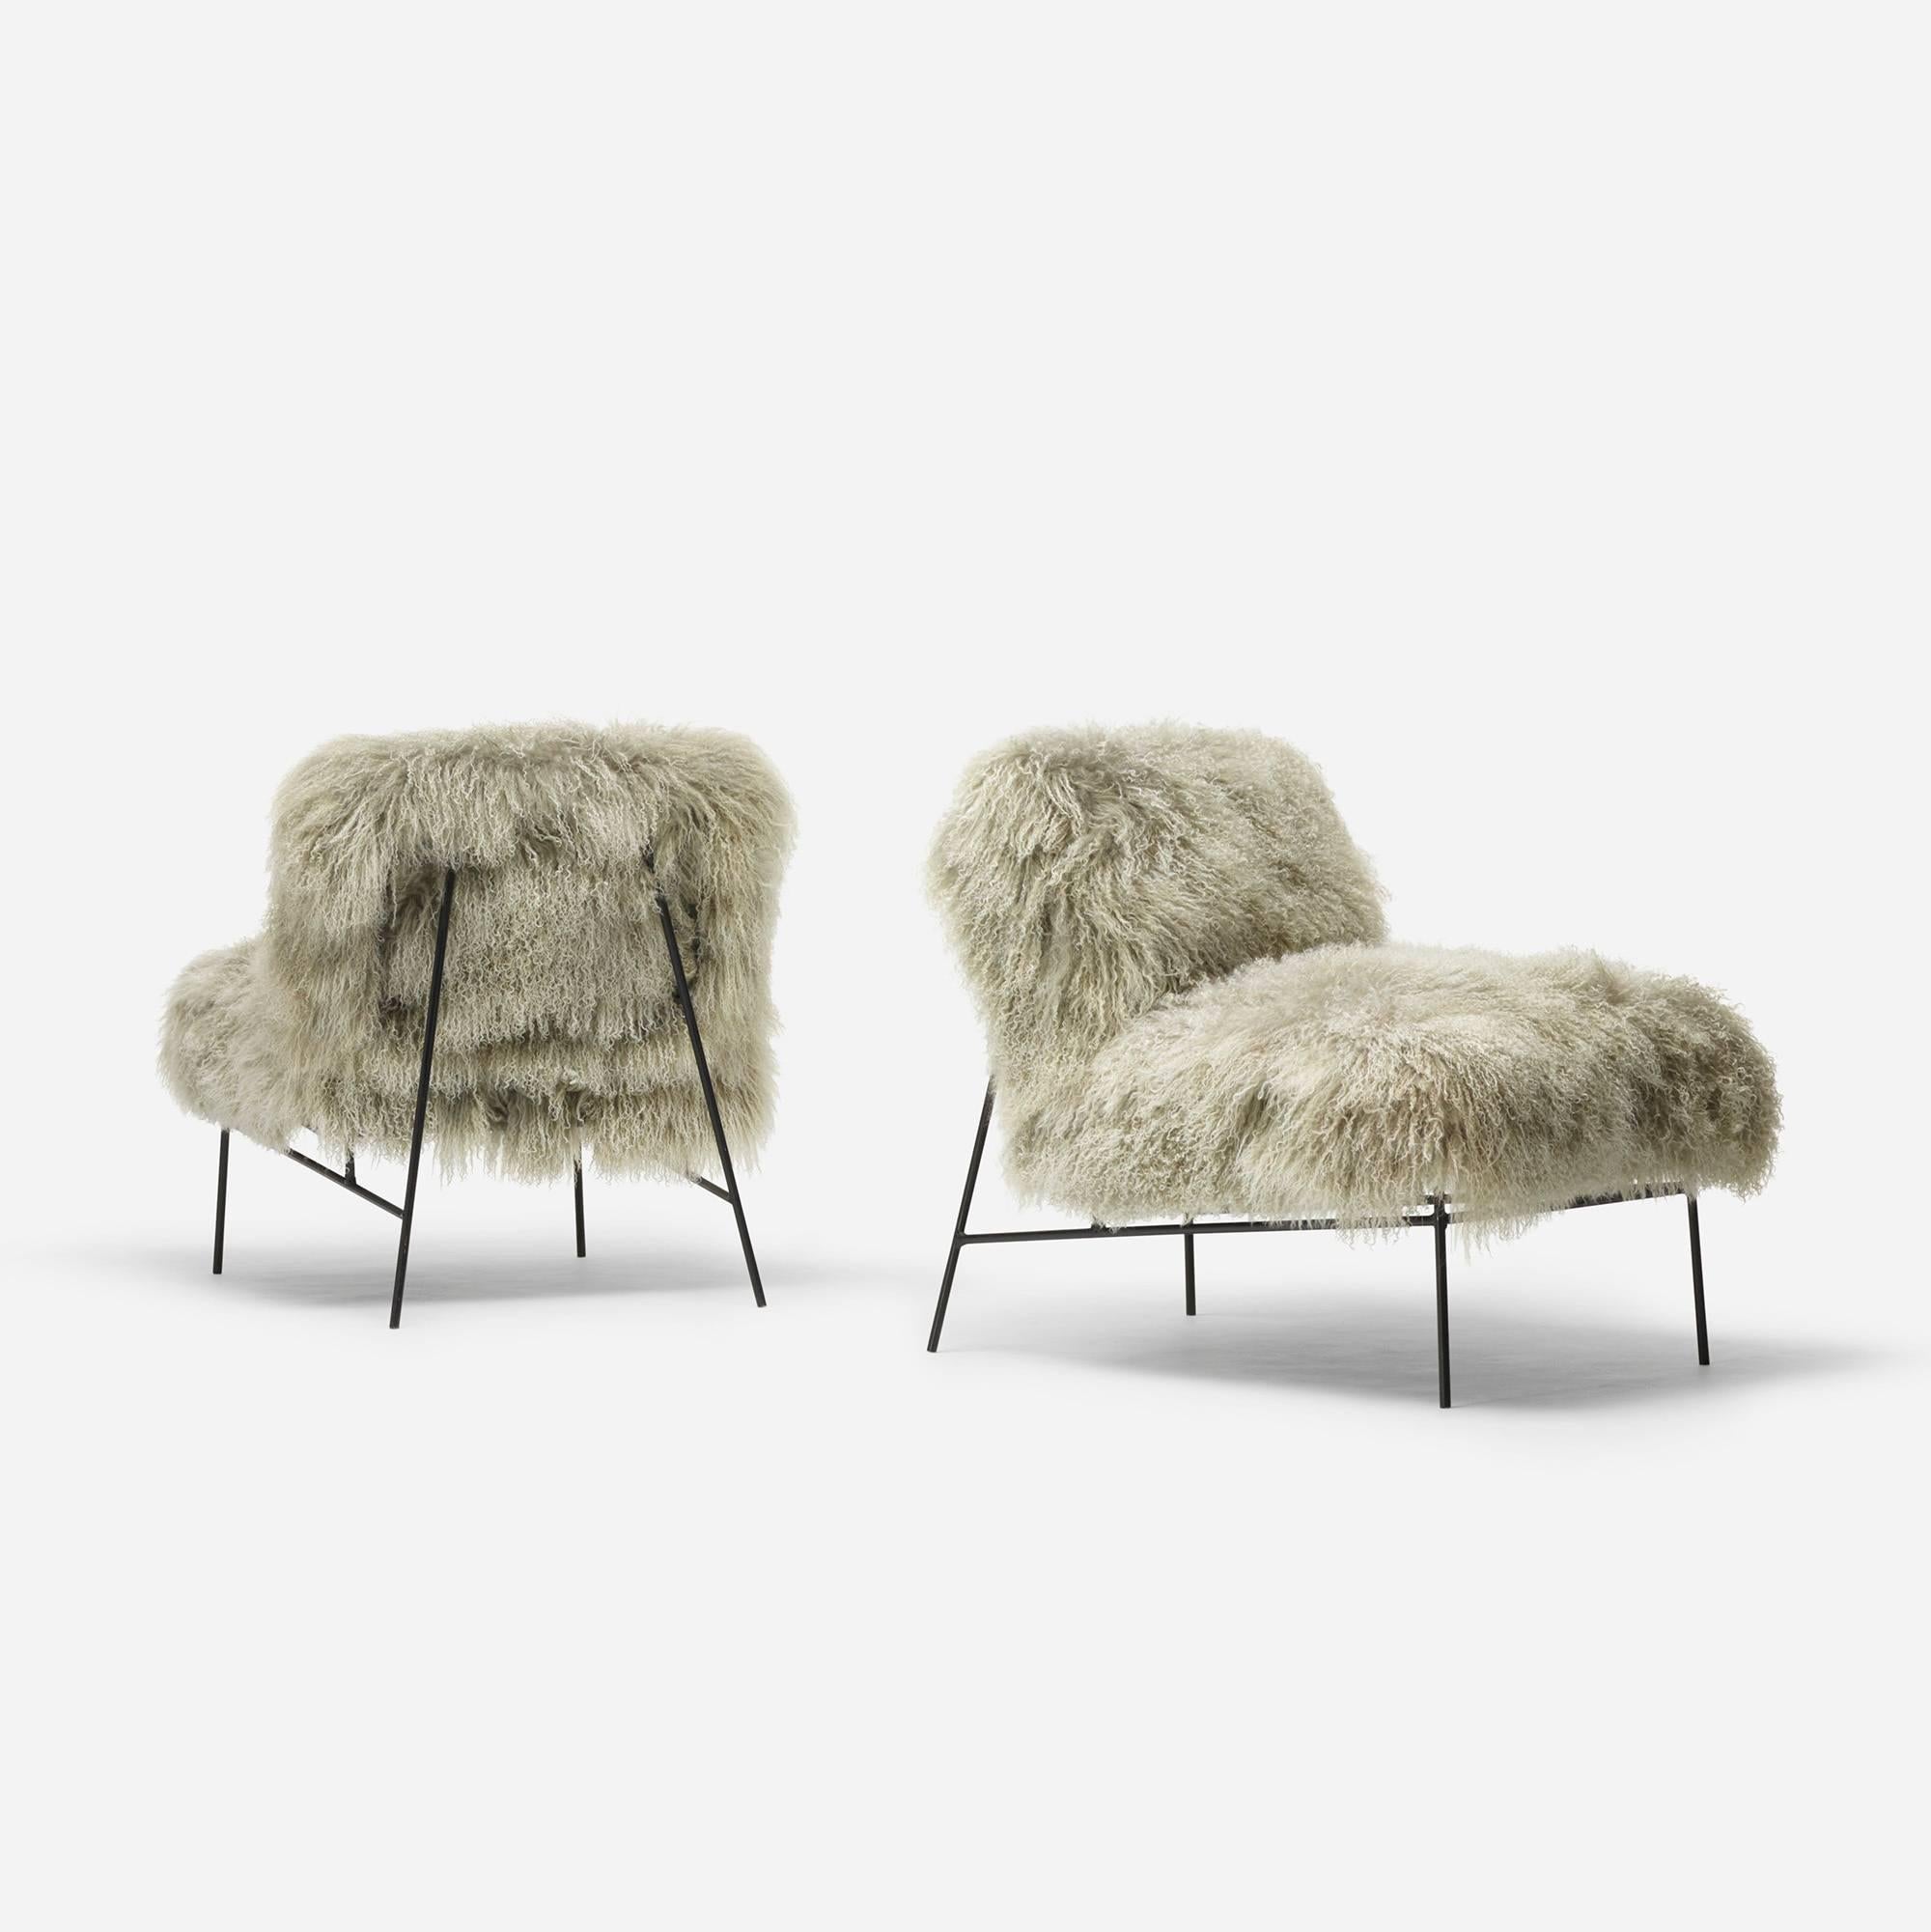 The simple, thin steel frame of these American lounge chairs allows the two-tone, grey to silver shearling to take center stage.